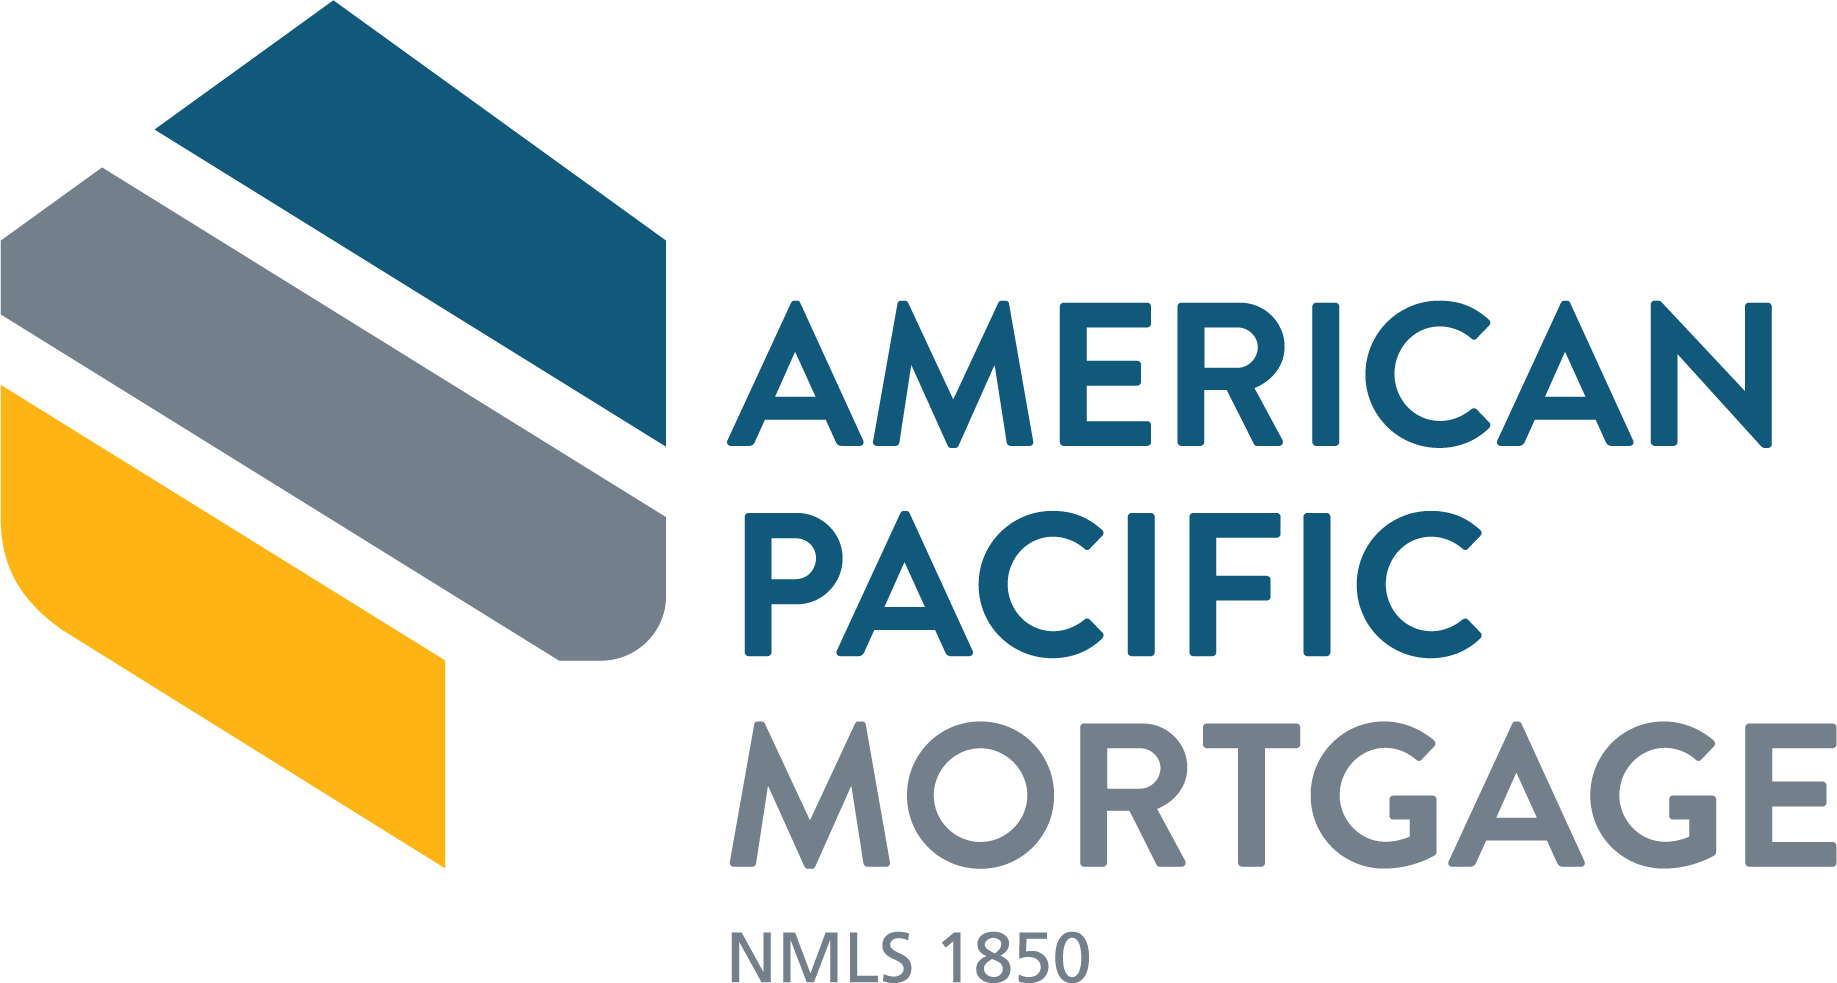 American Pacific Mortgage logo with a blue, gray and yellow stripe to the left side of the company name